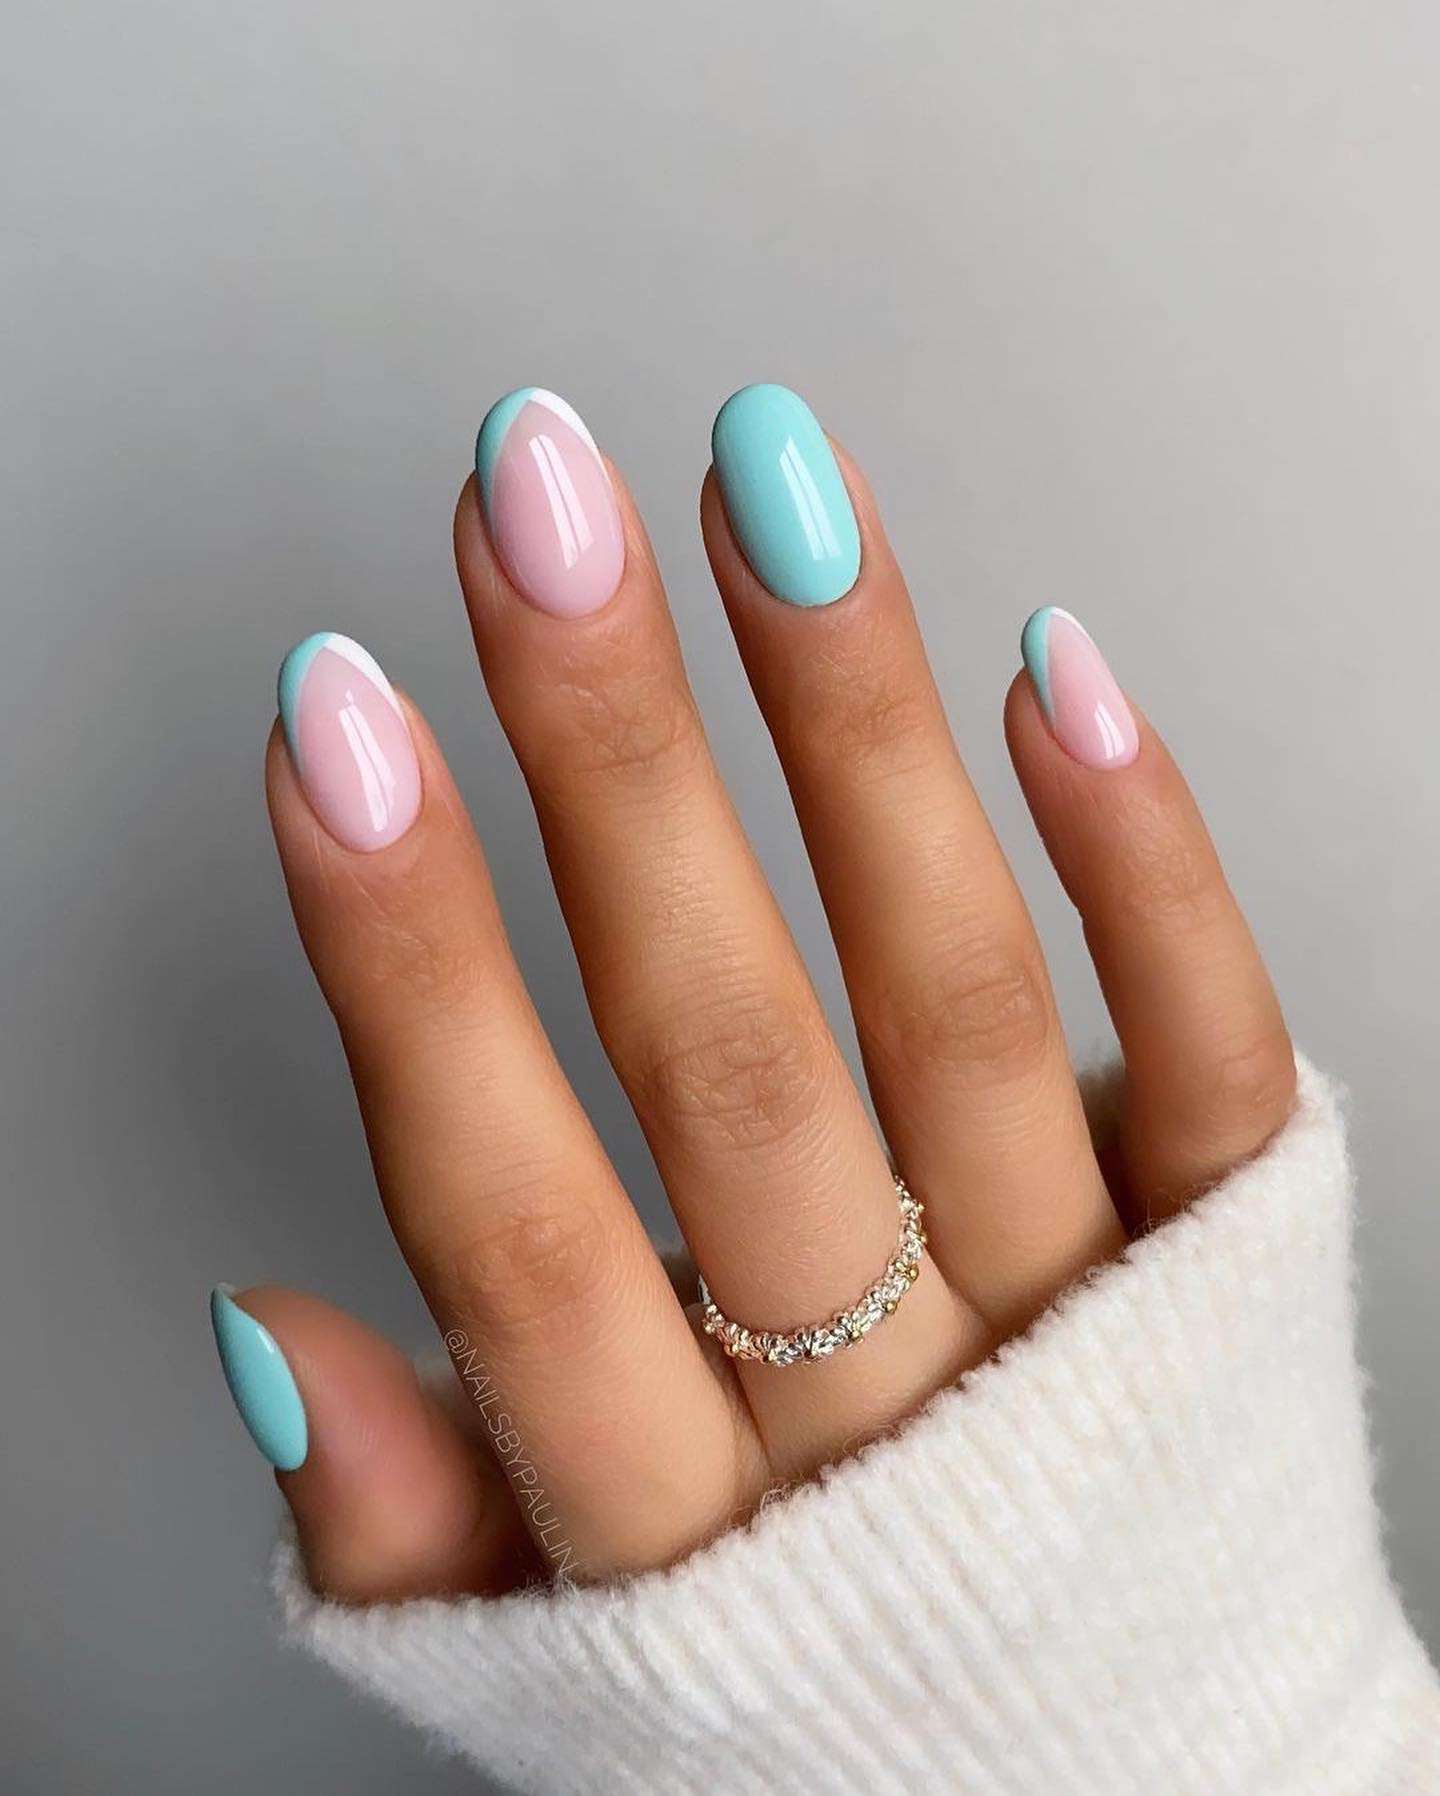 35 Nail Designs For 2022 You’ll Want To Try Immediately images 34